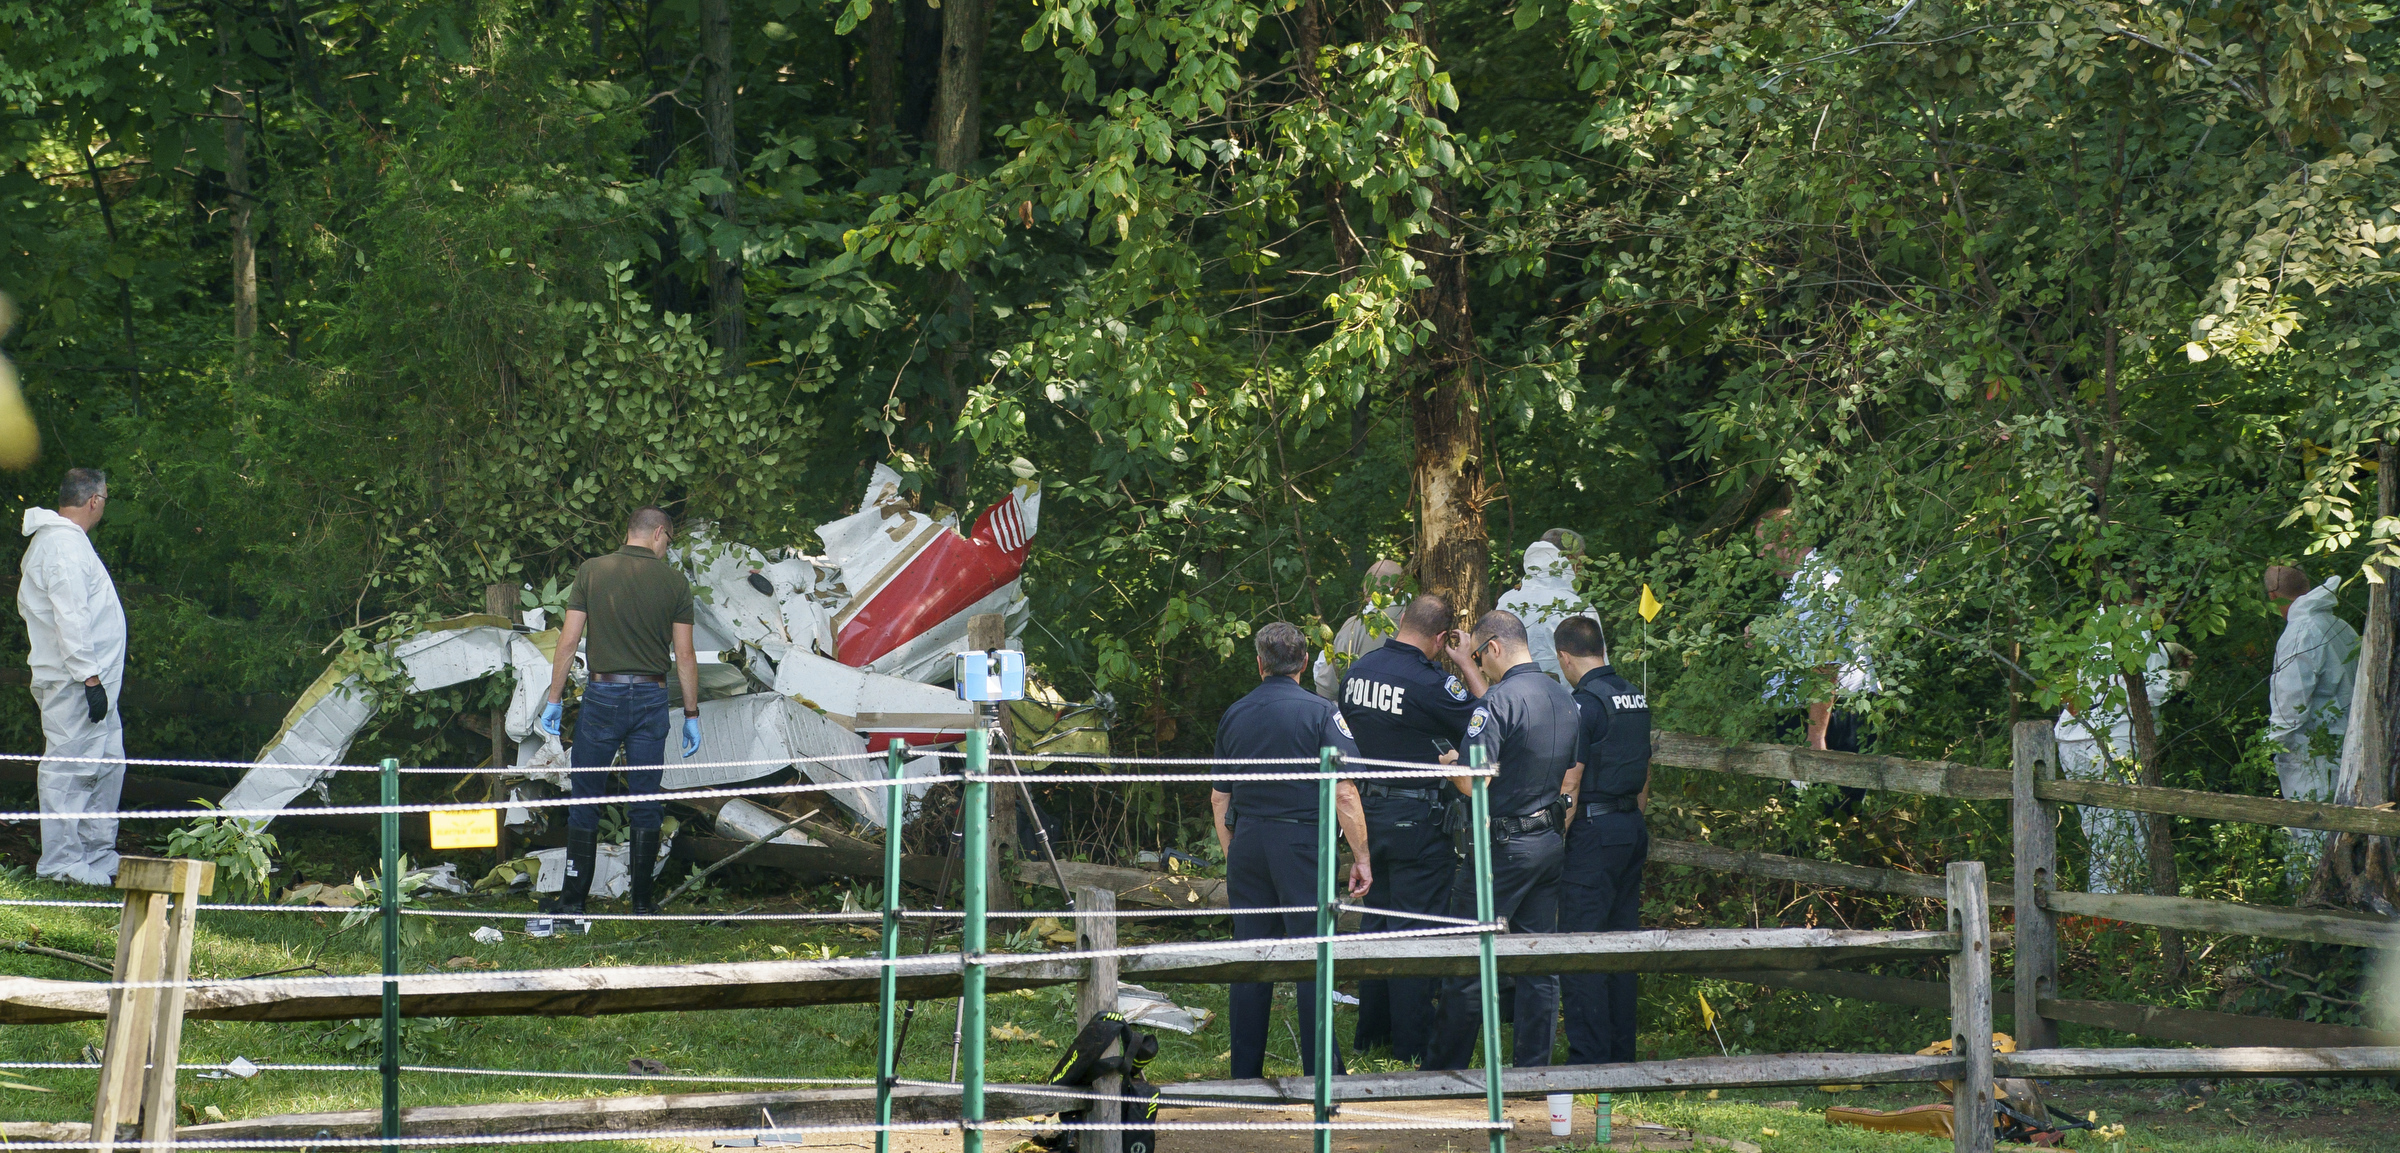 PHOTO: Officials investigate the scene where a small aircraft crashed in a residential neighborhood in Upper Moreland, Pa., Aug. 8, 2019.